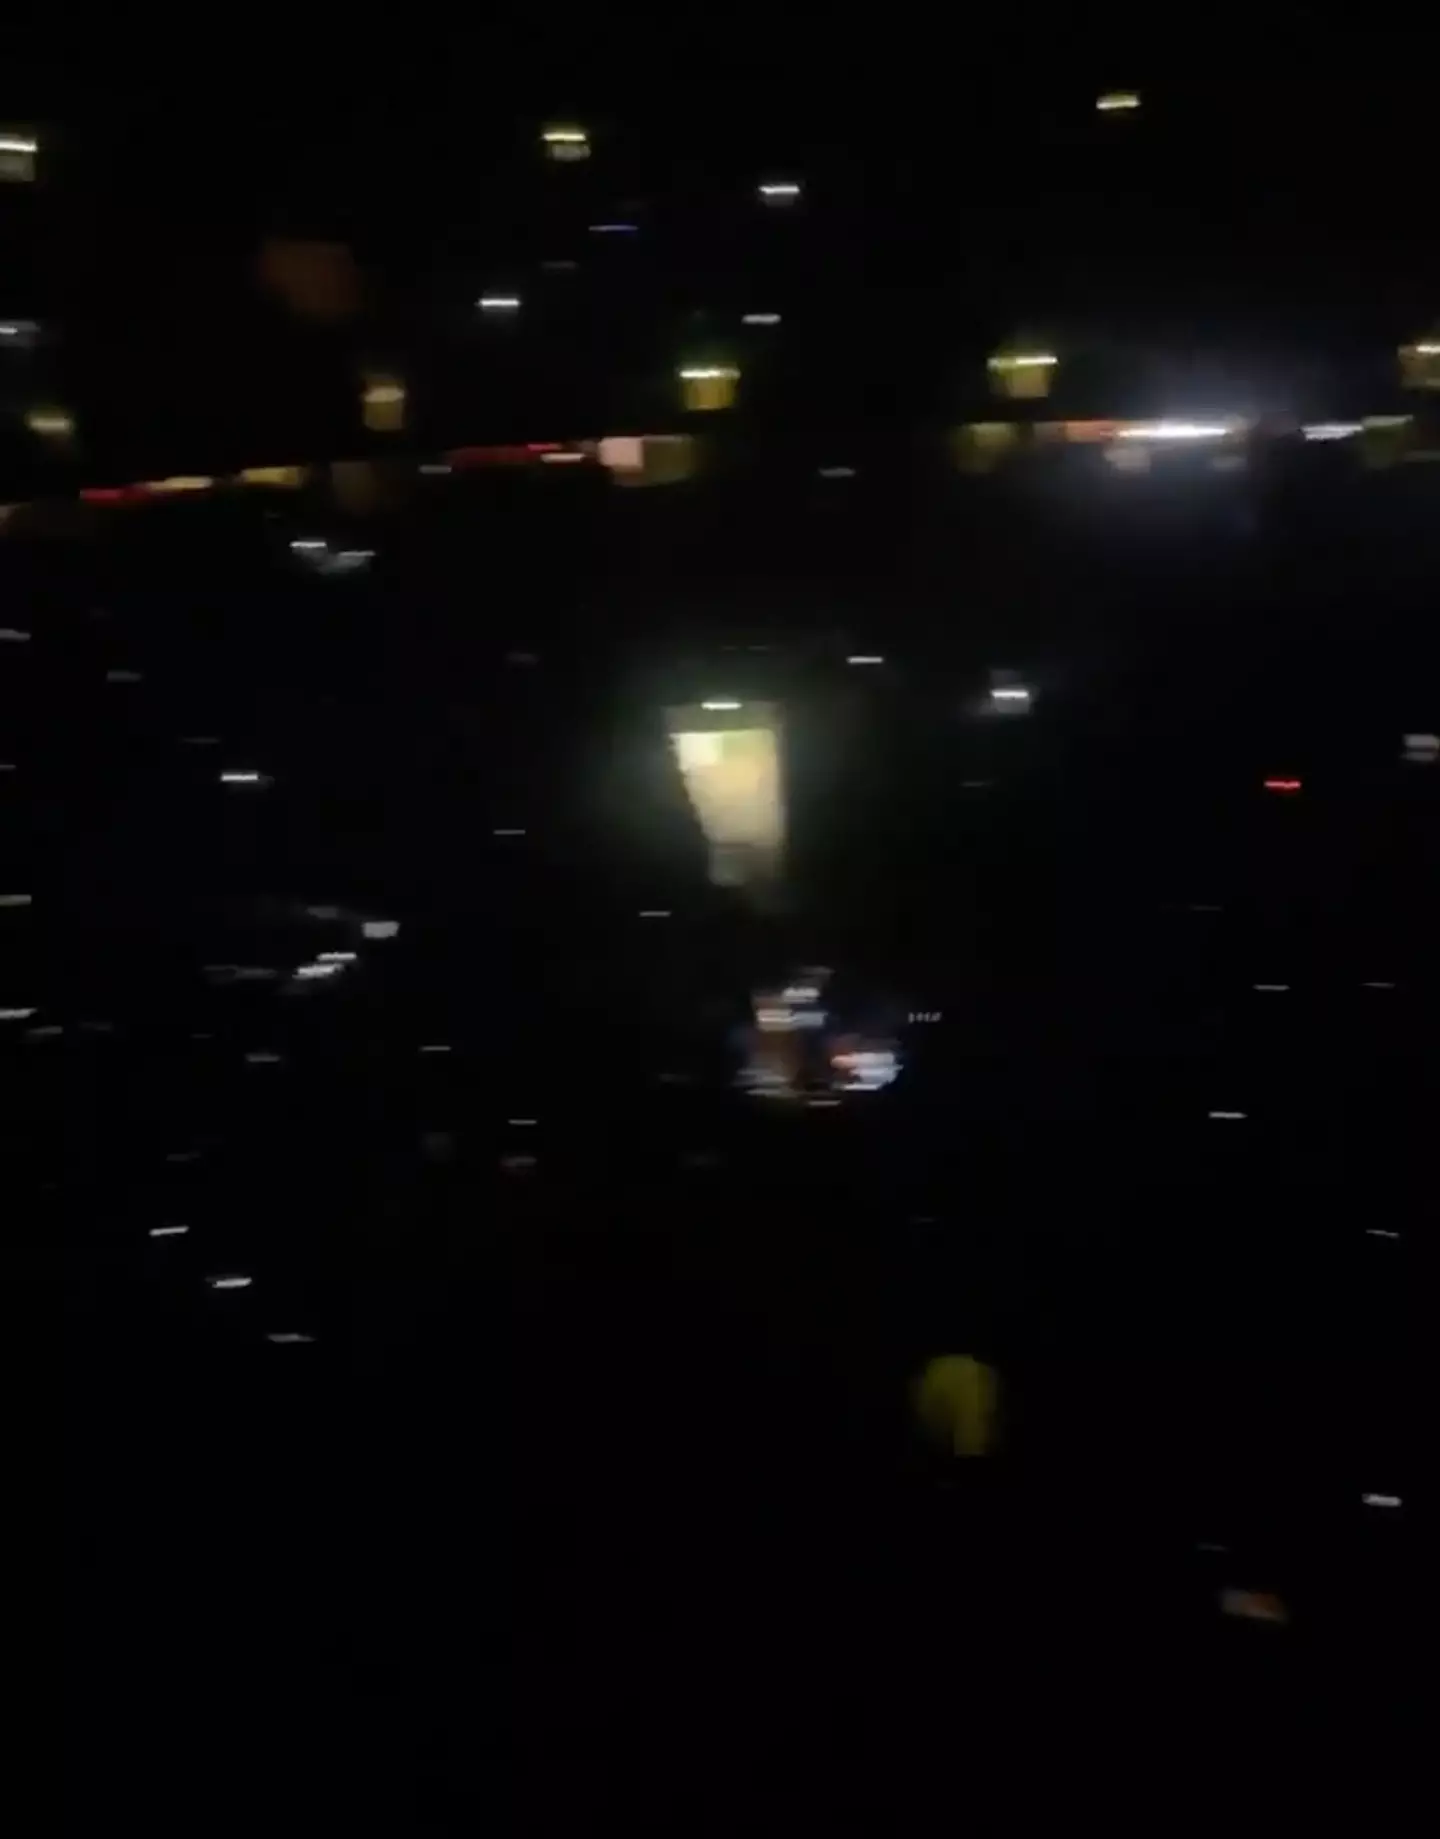 Sam Smith's fans were plunged into darkness during their concert in Manchester.